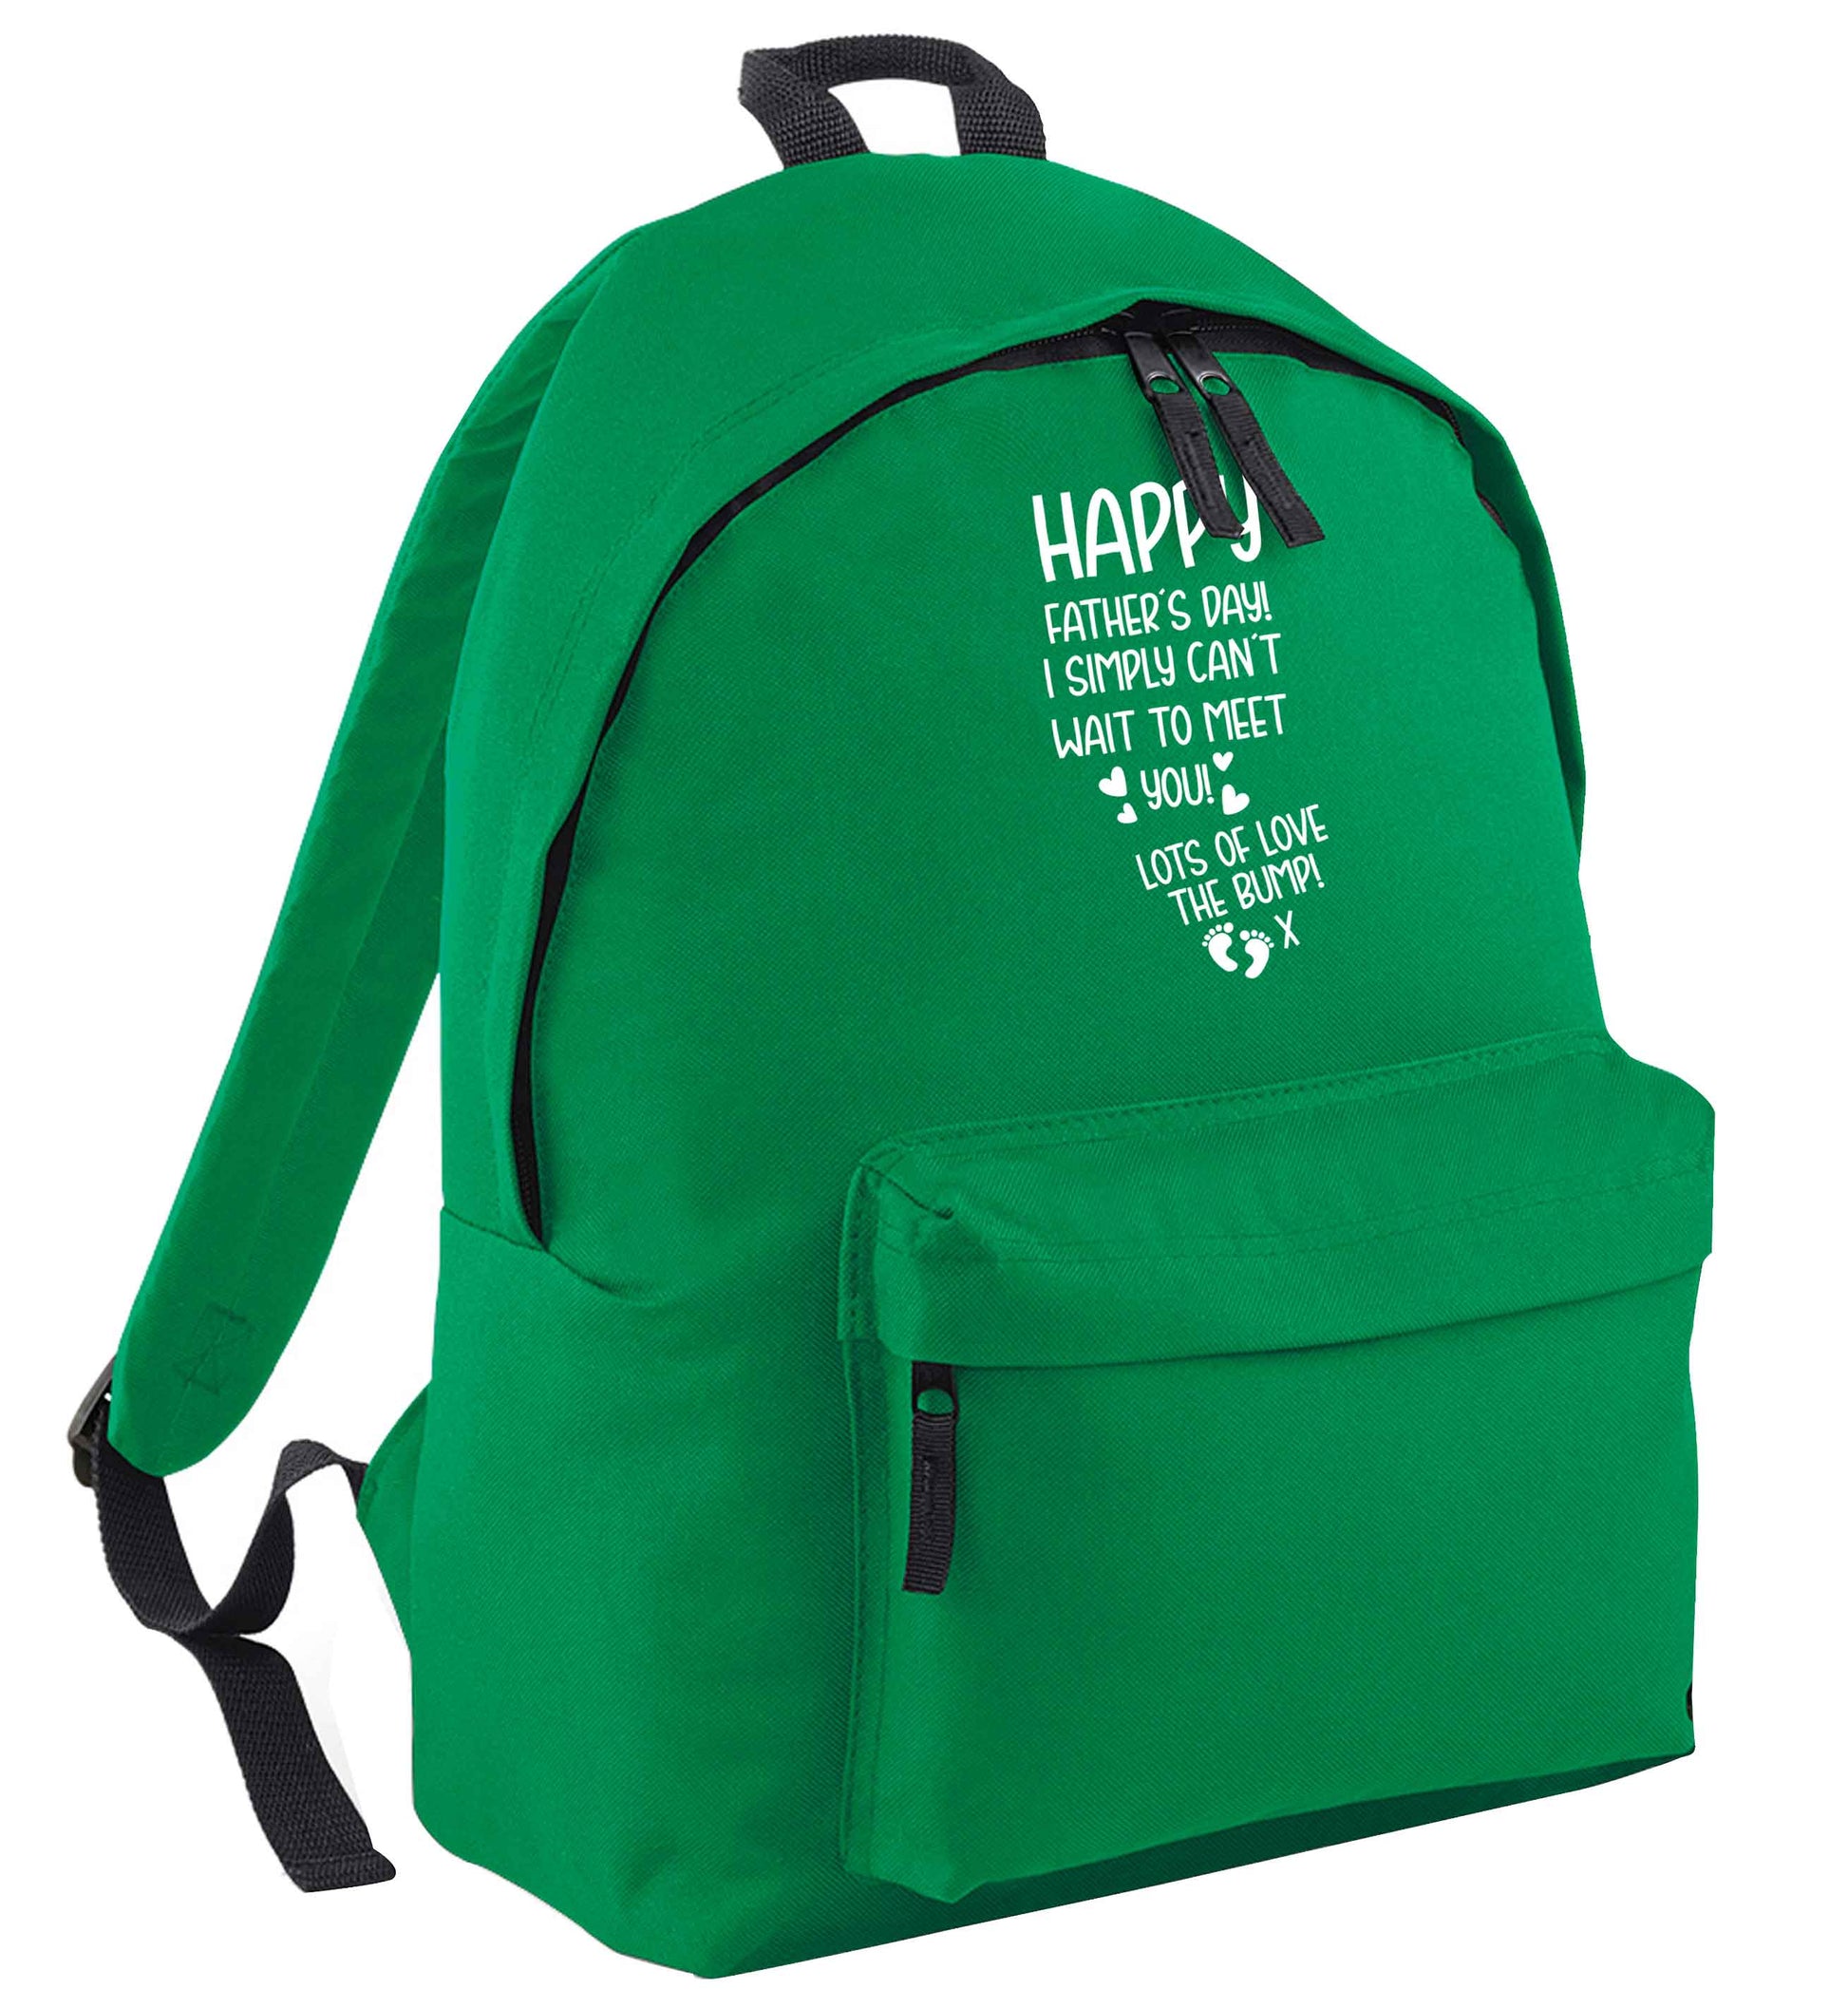 Happy Father's day daddy I can't wait to meet you lot's of love the bump! green adults backpack